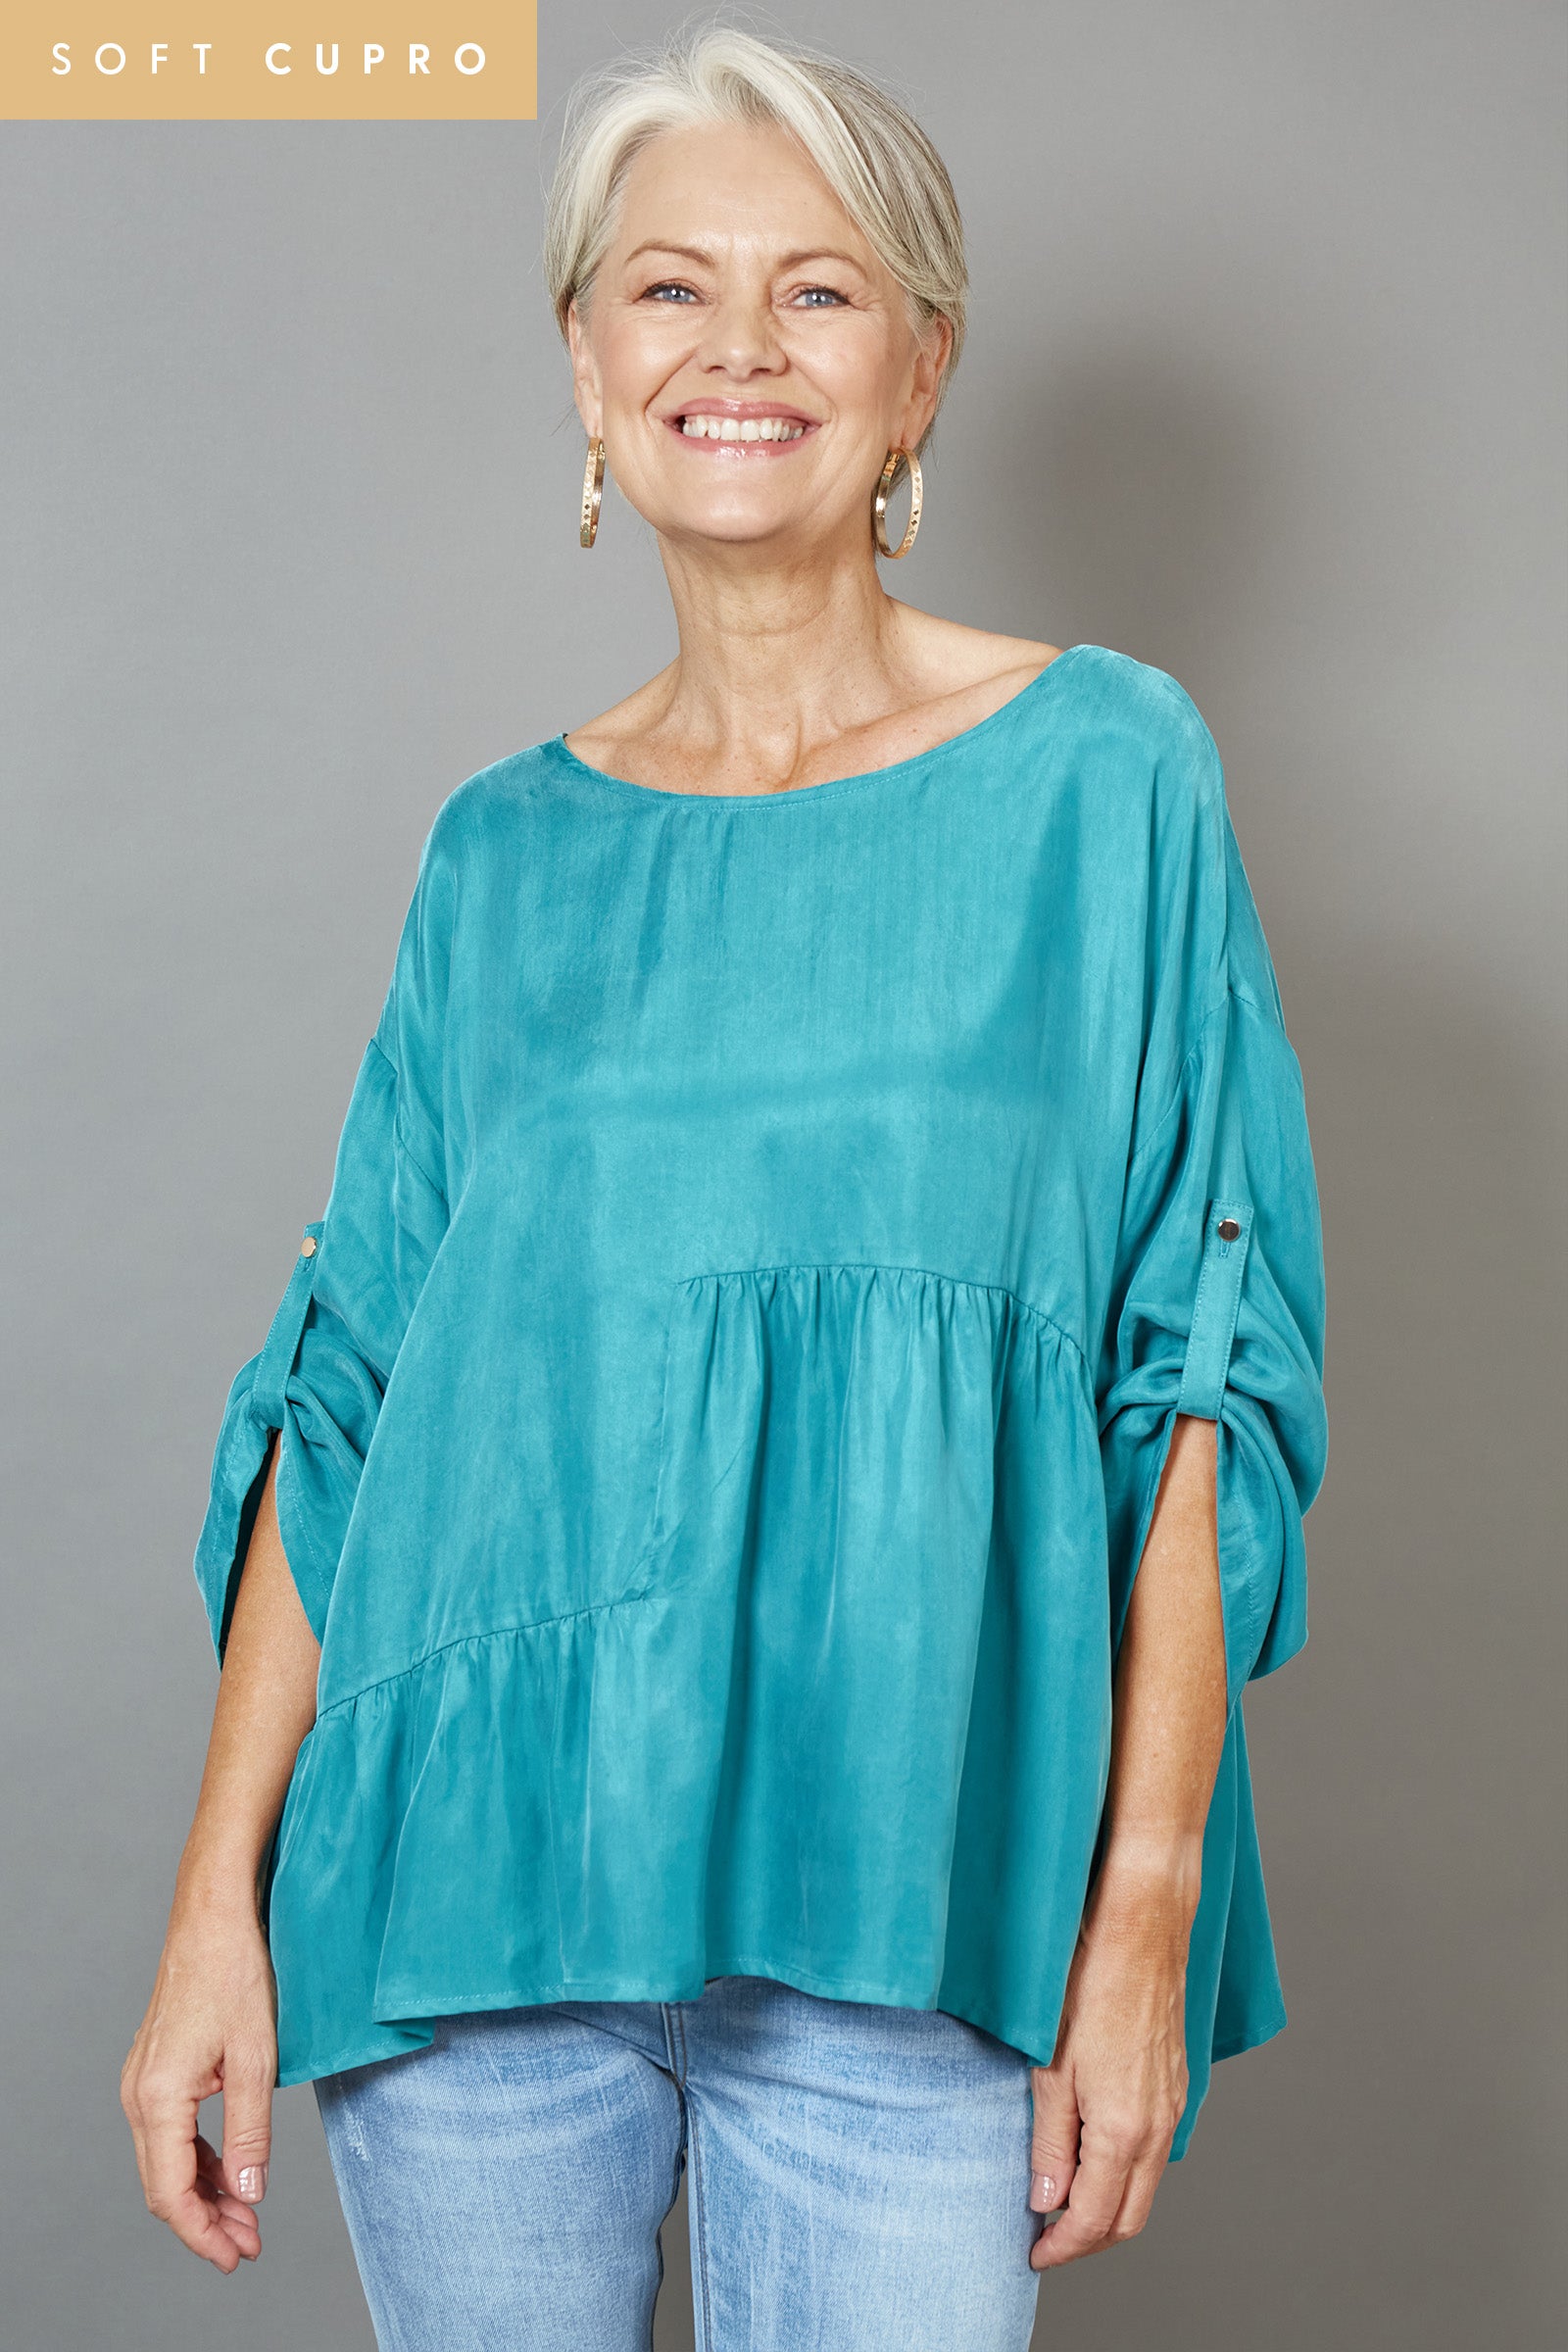 Vienetta Top - Teal - eb&ive Clothing - Top L/S Dressy